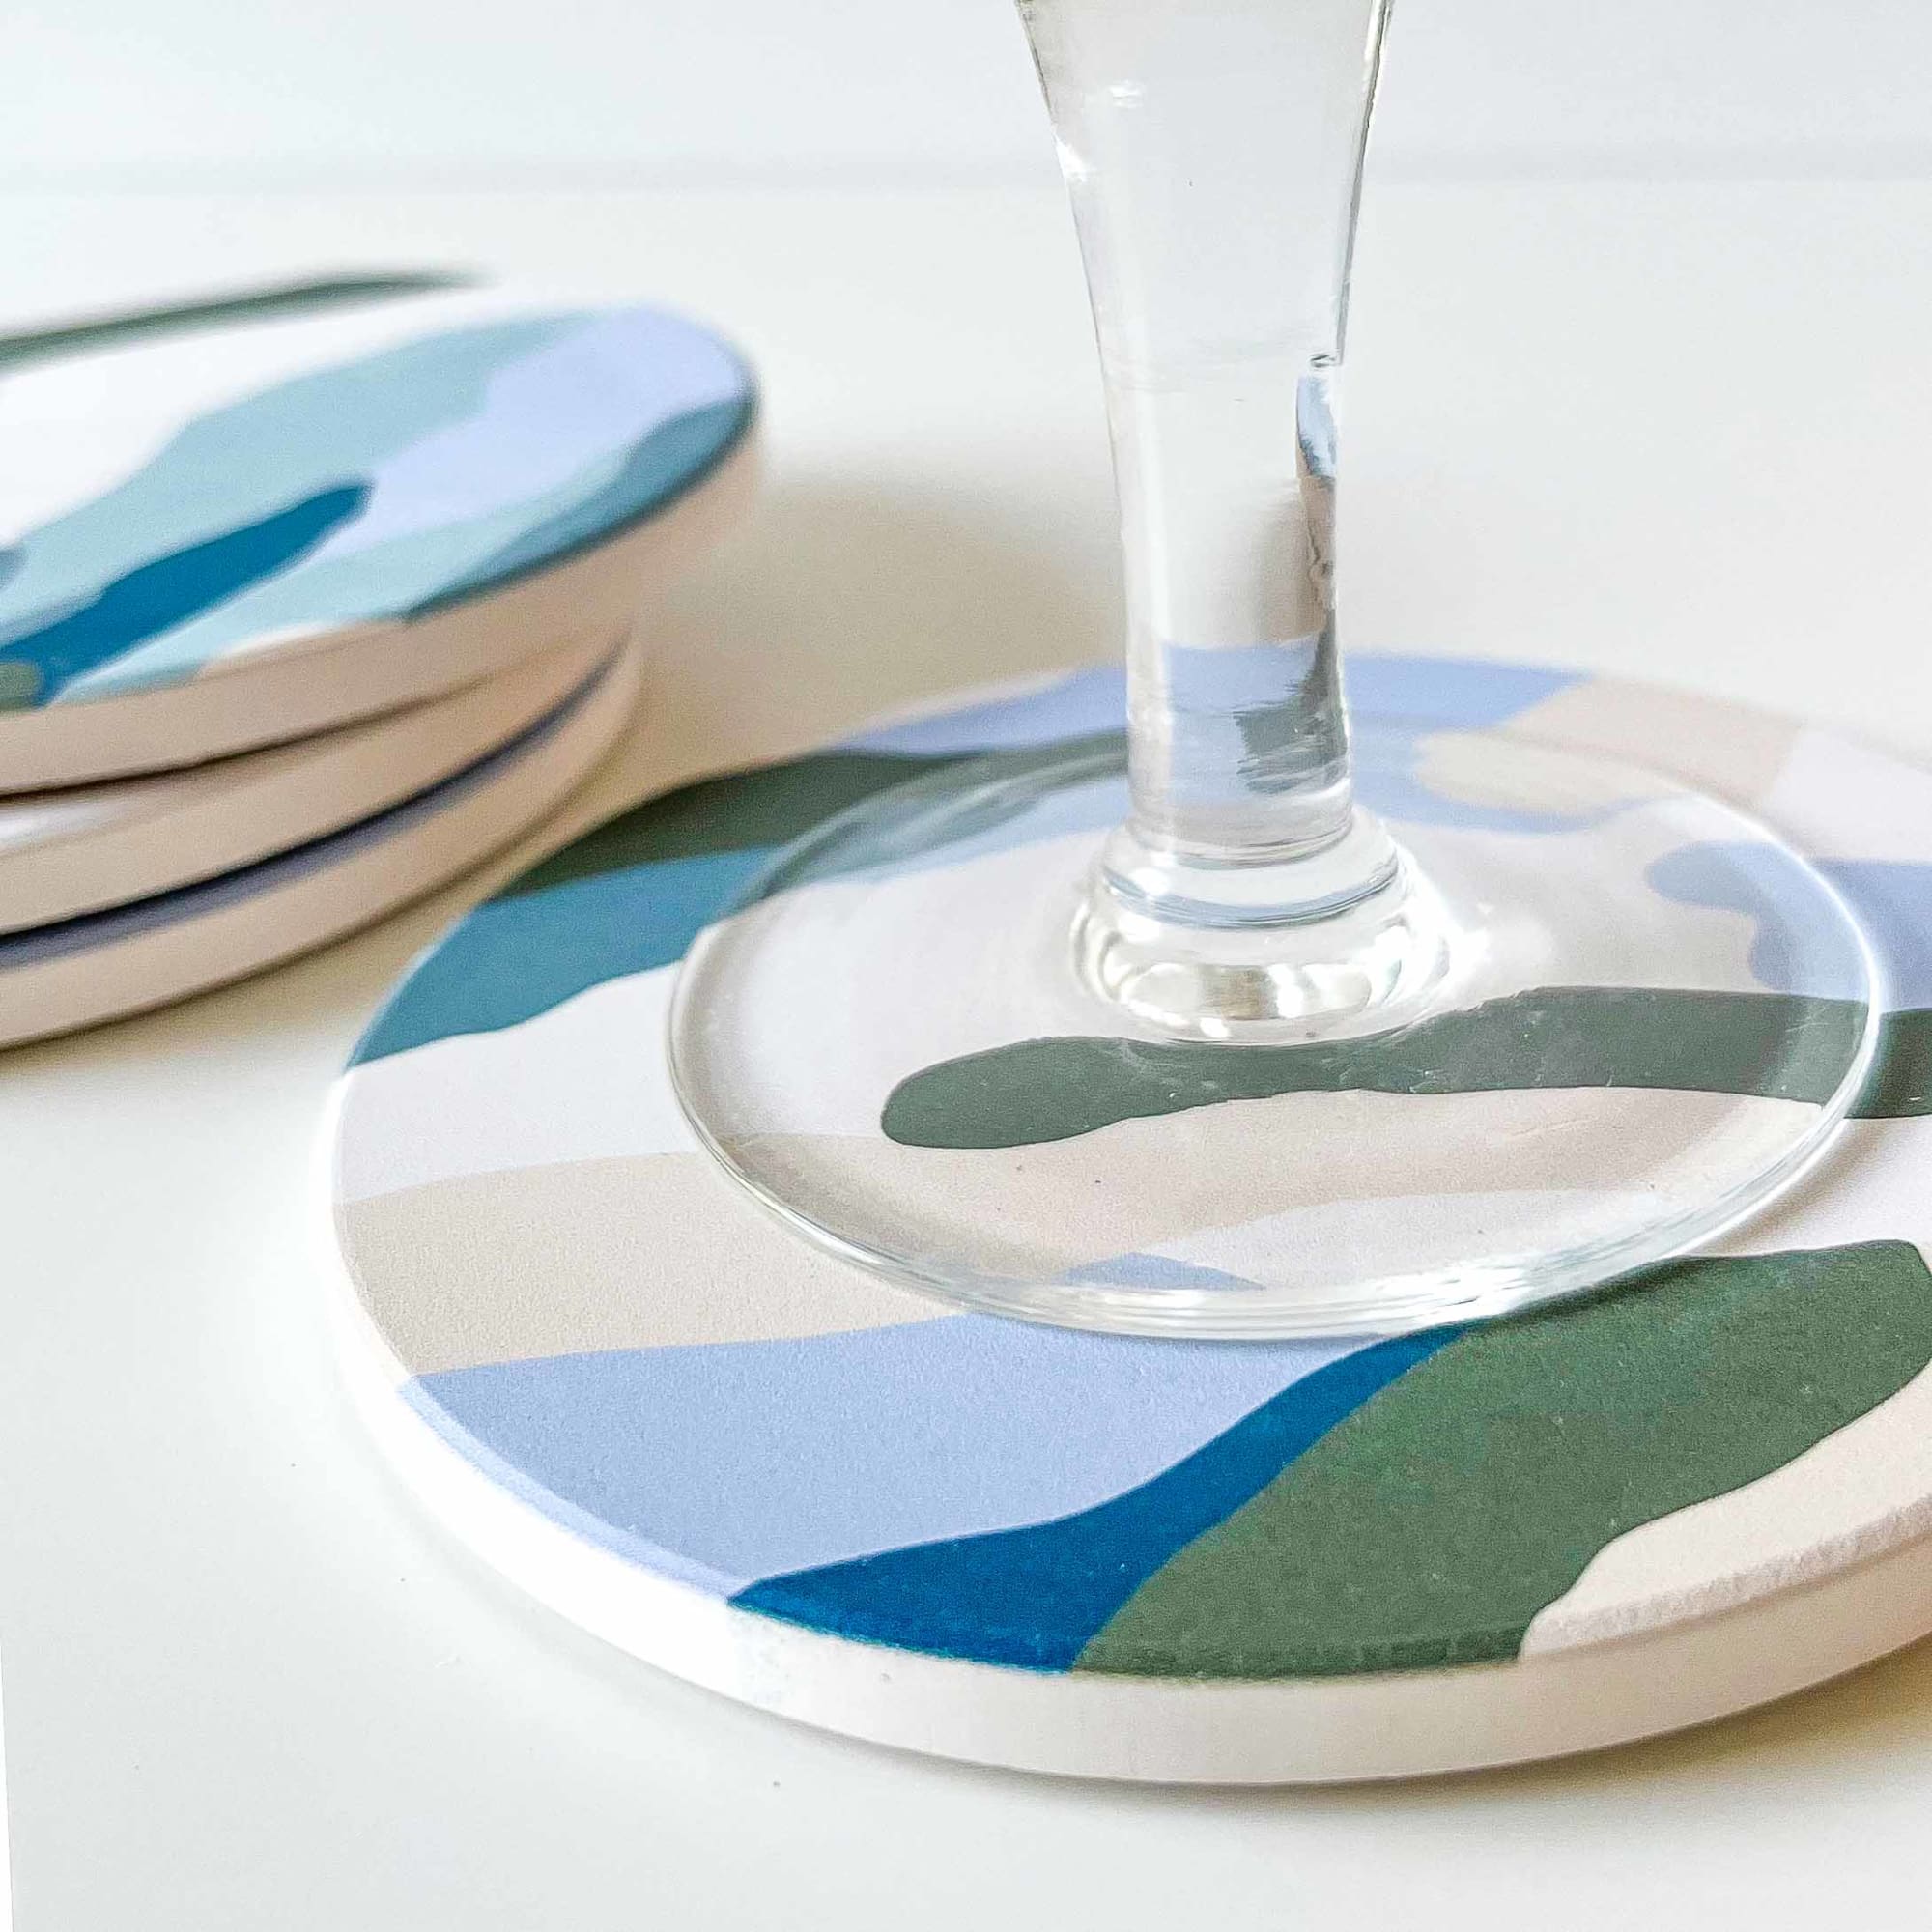 Closeup on the foot of a glass on a ceramic coaster designed by The Baltic Club